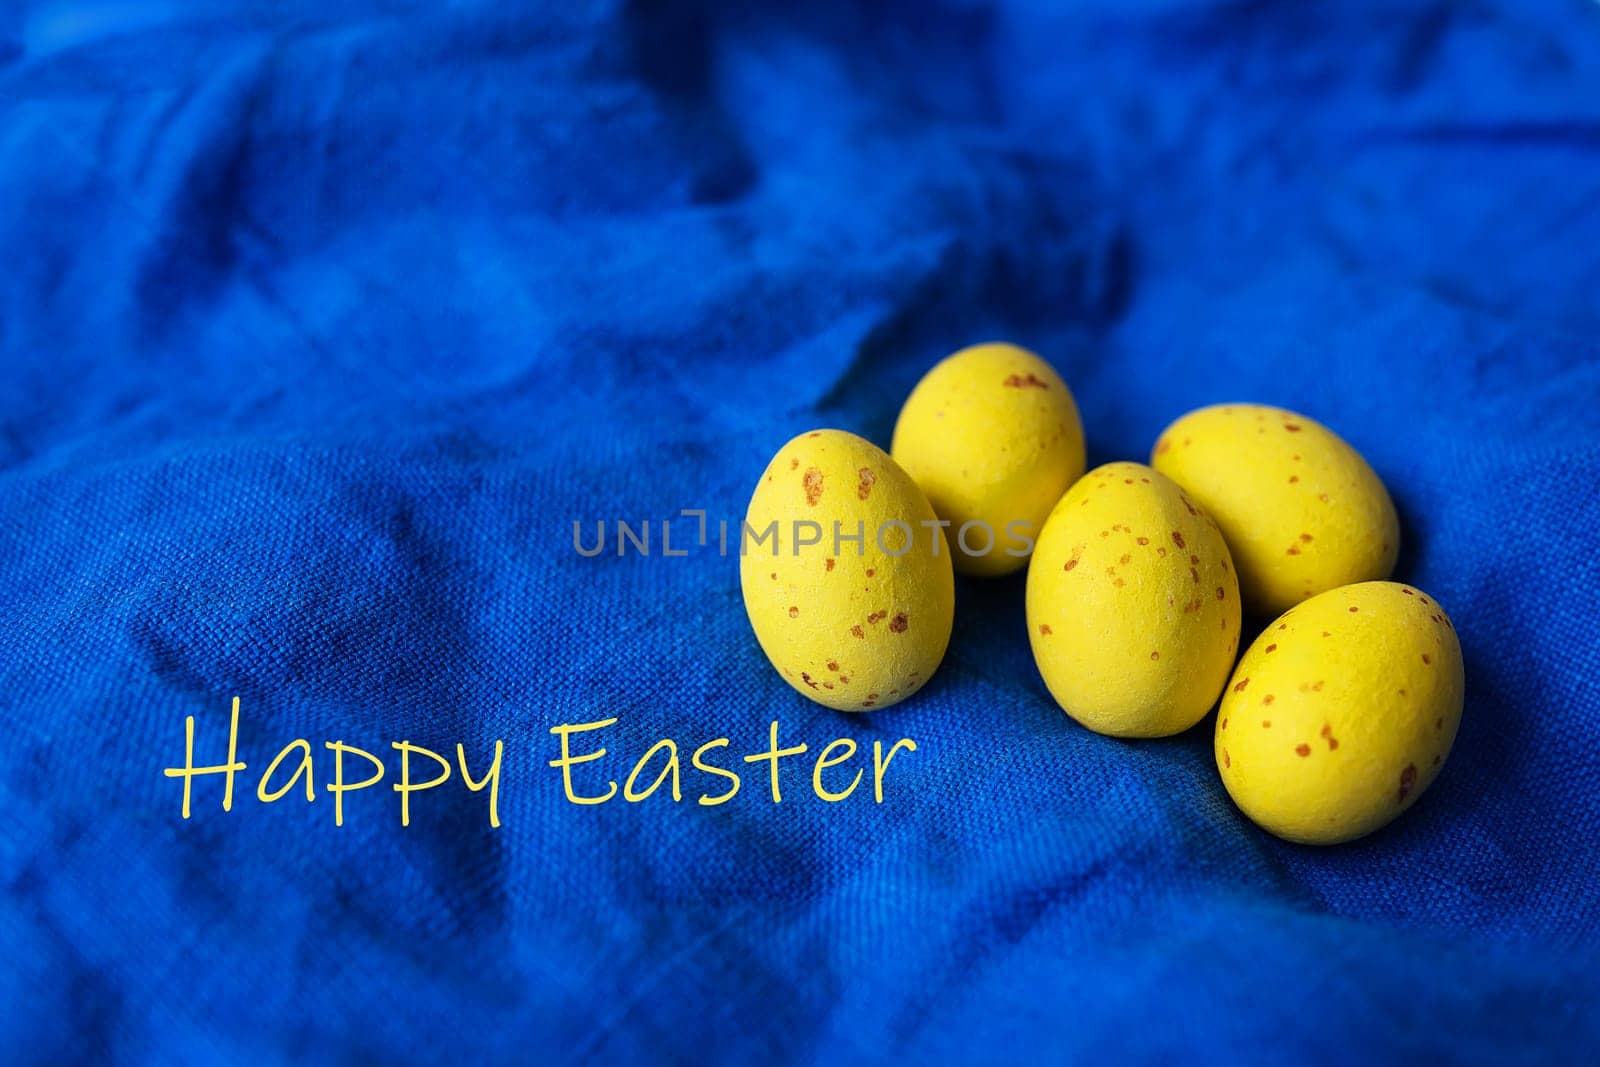 Top view of yellow decorated Easter eggs on napkin on blue textured linen background. Greeting card with the inscription Happy Easter